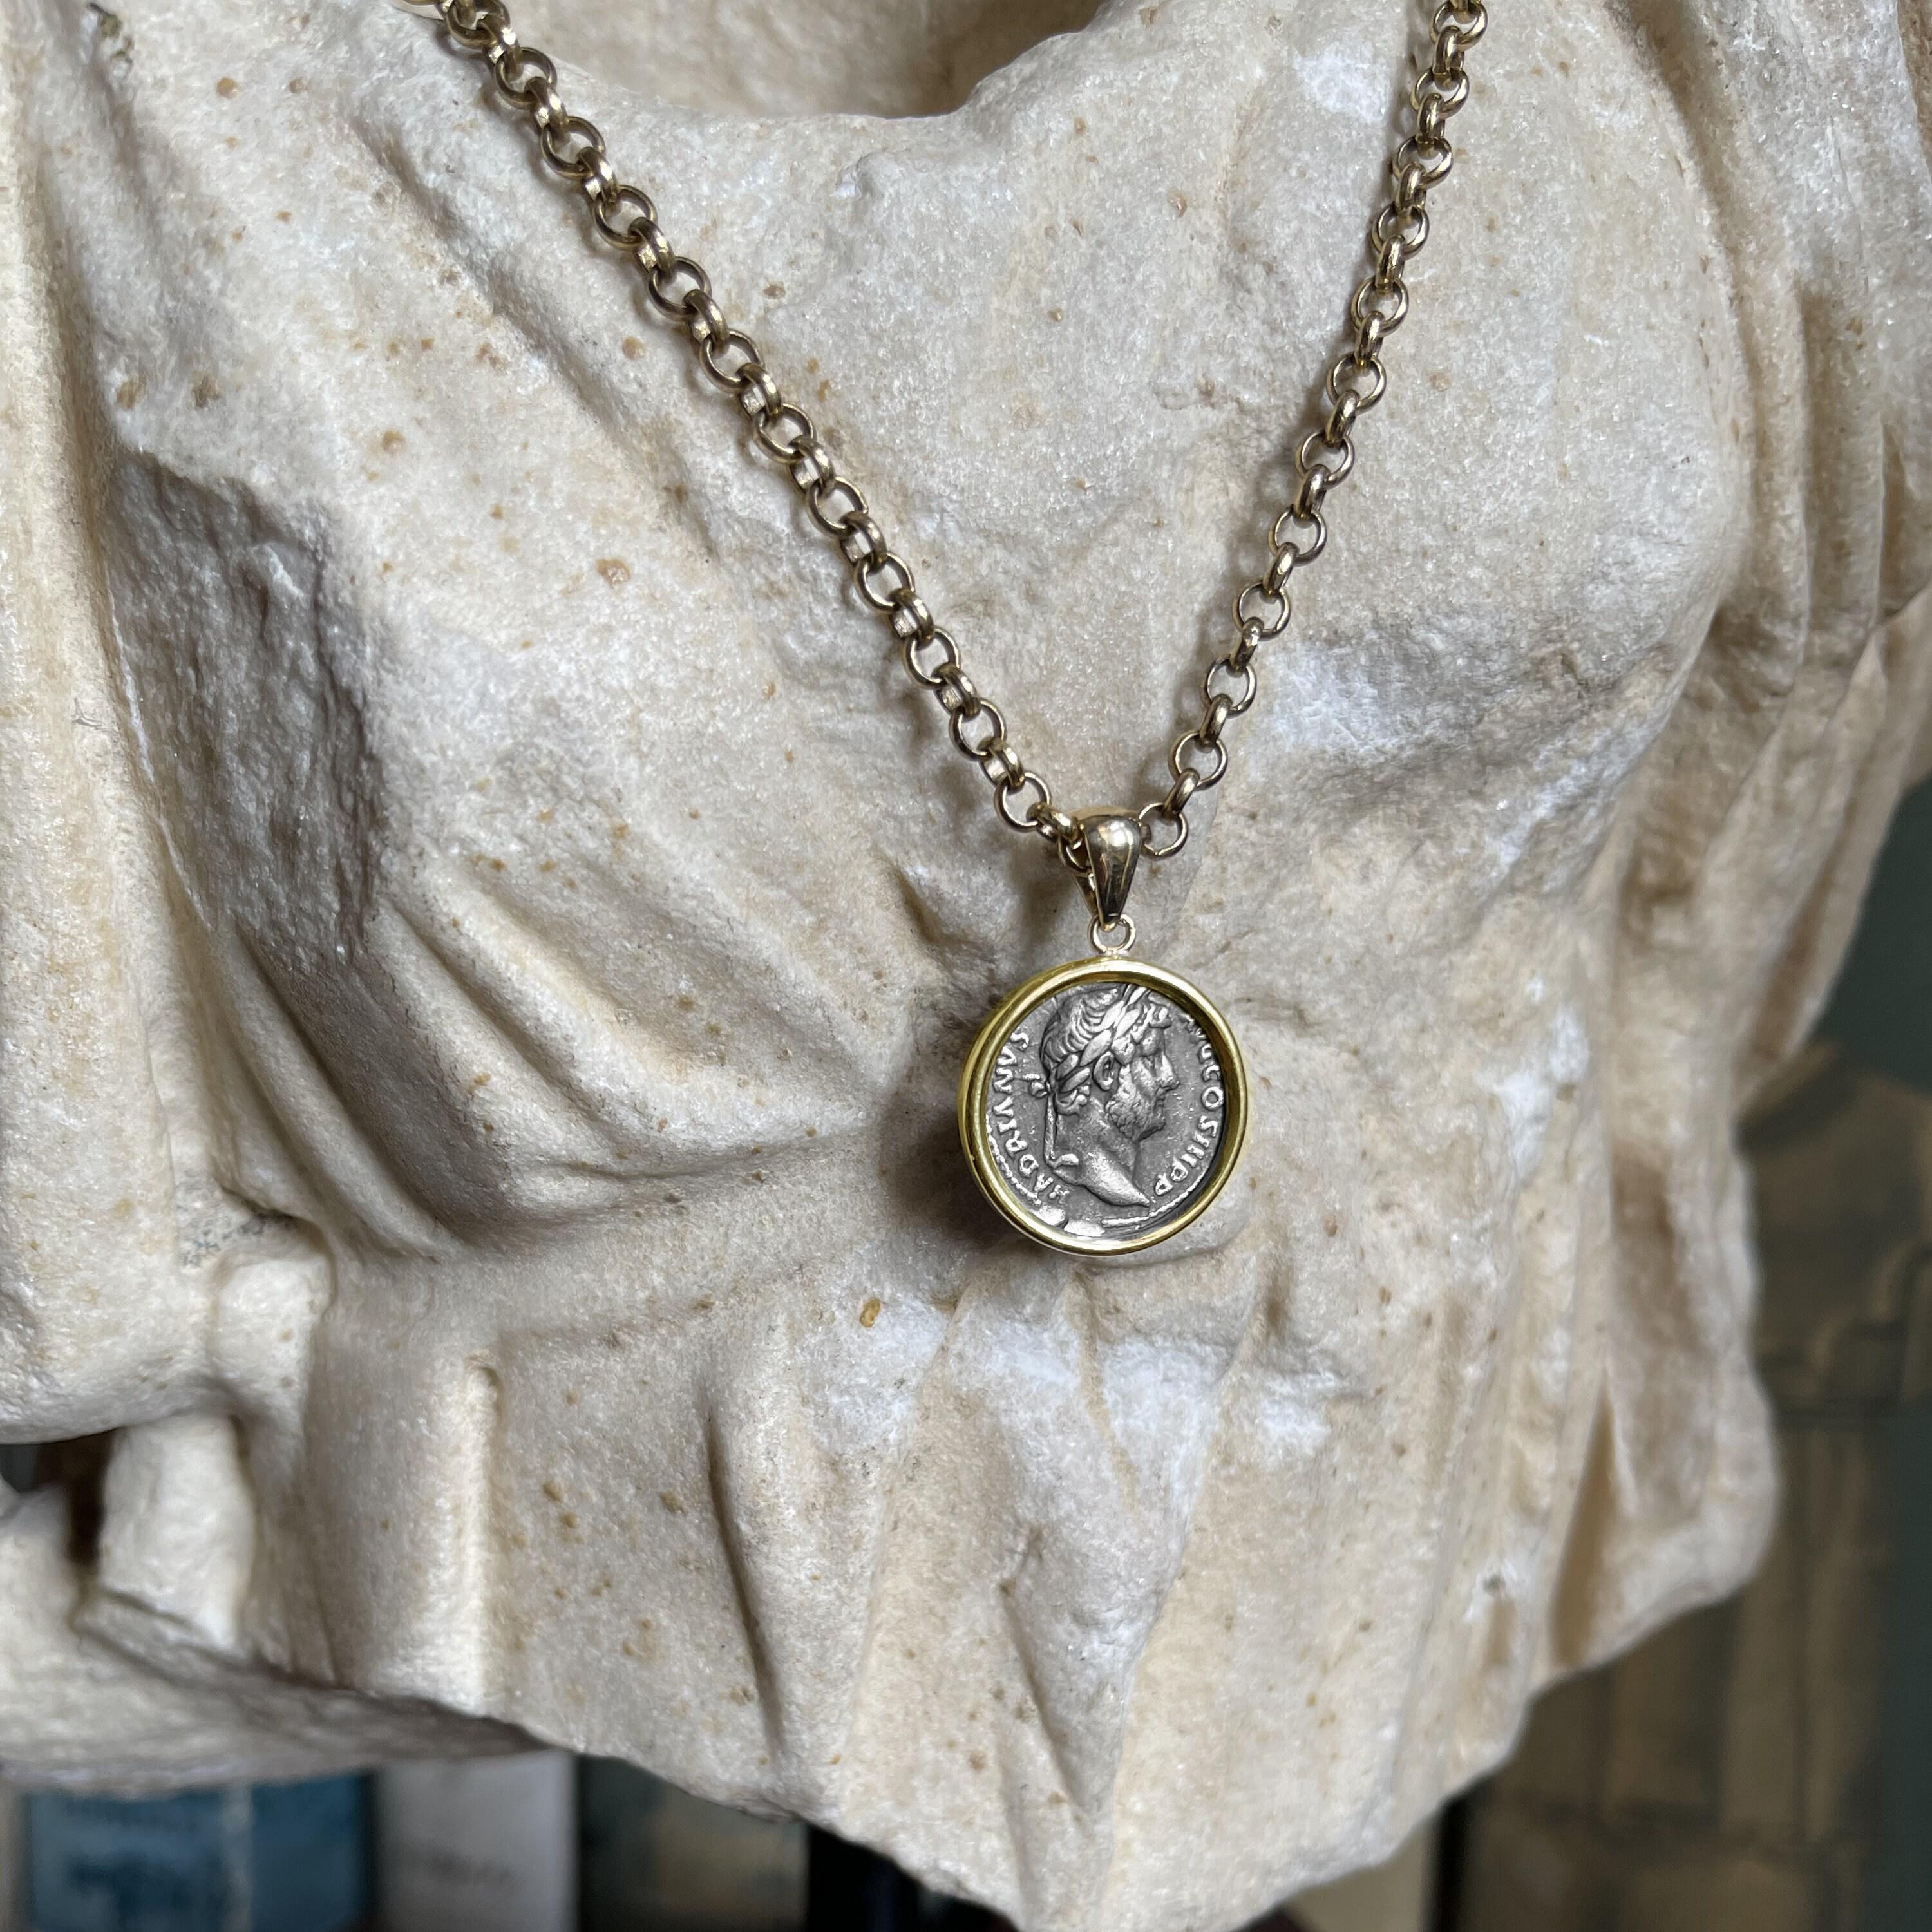 This exquisite 18 Kt gold pendant showcases an authentic Roman coin from the 2nd century AD, featuring Emperor Hadrian on one side and the seated Goddess Fortuna on the other. Hadrian, celebrated for his extensive travels and ambitious building